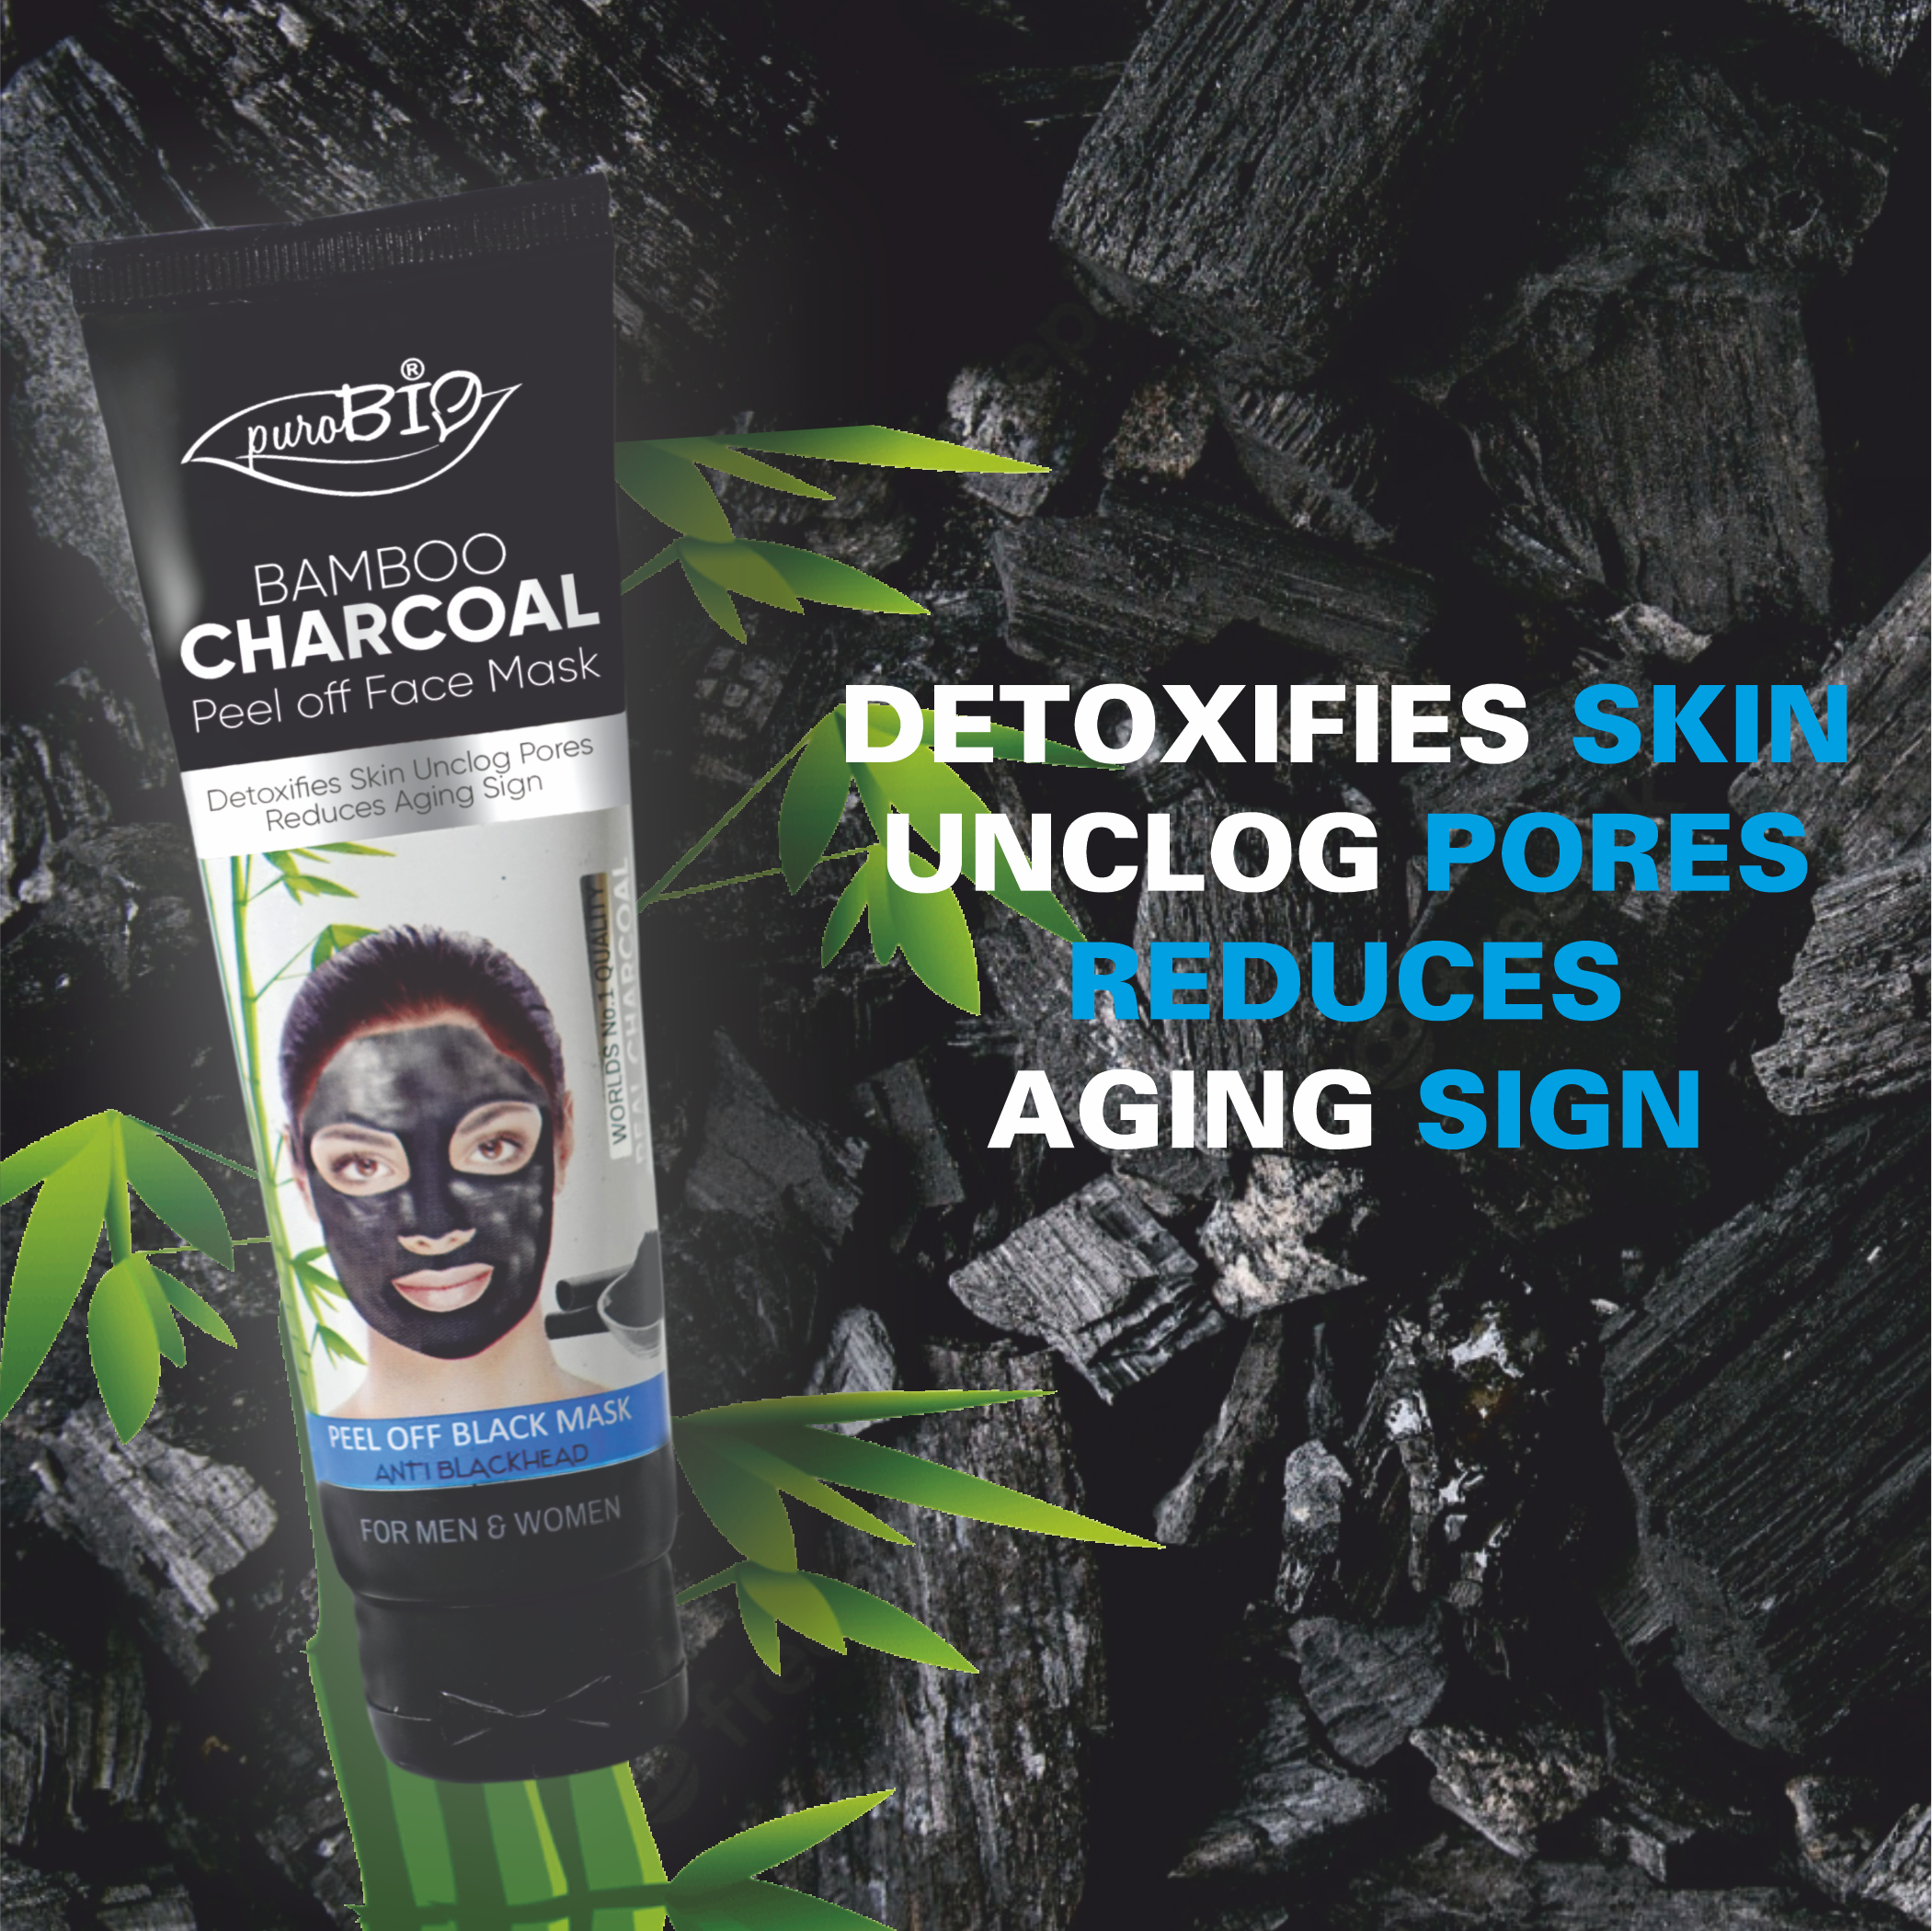 Bamboo Charcoal Peel Off Face Mask